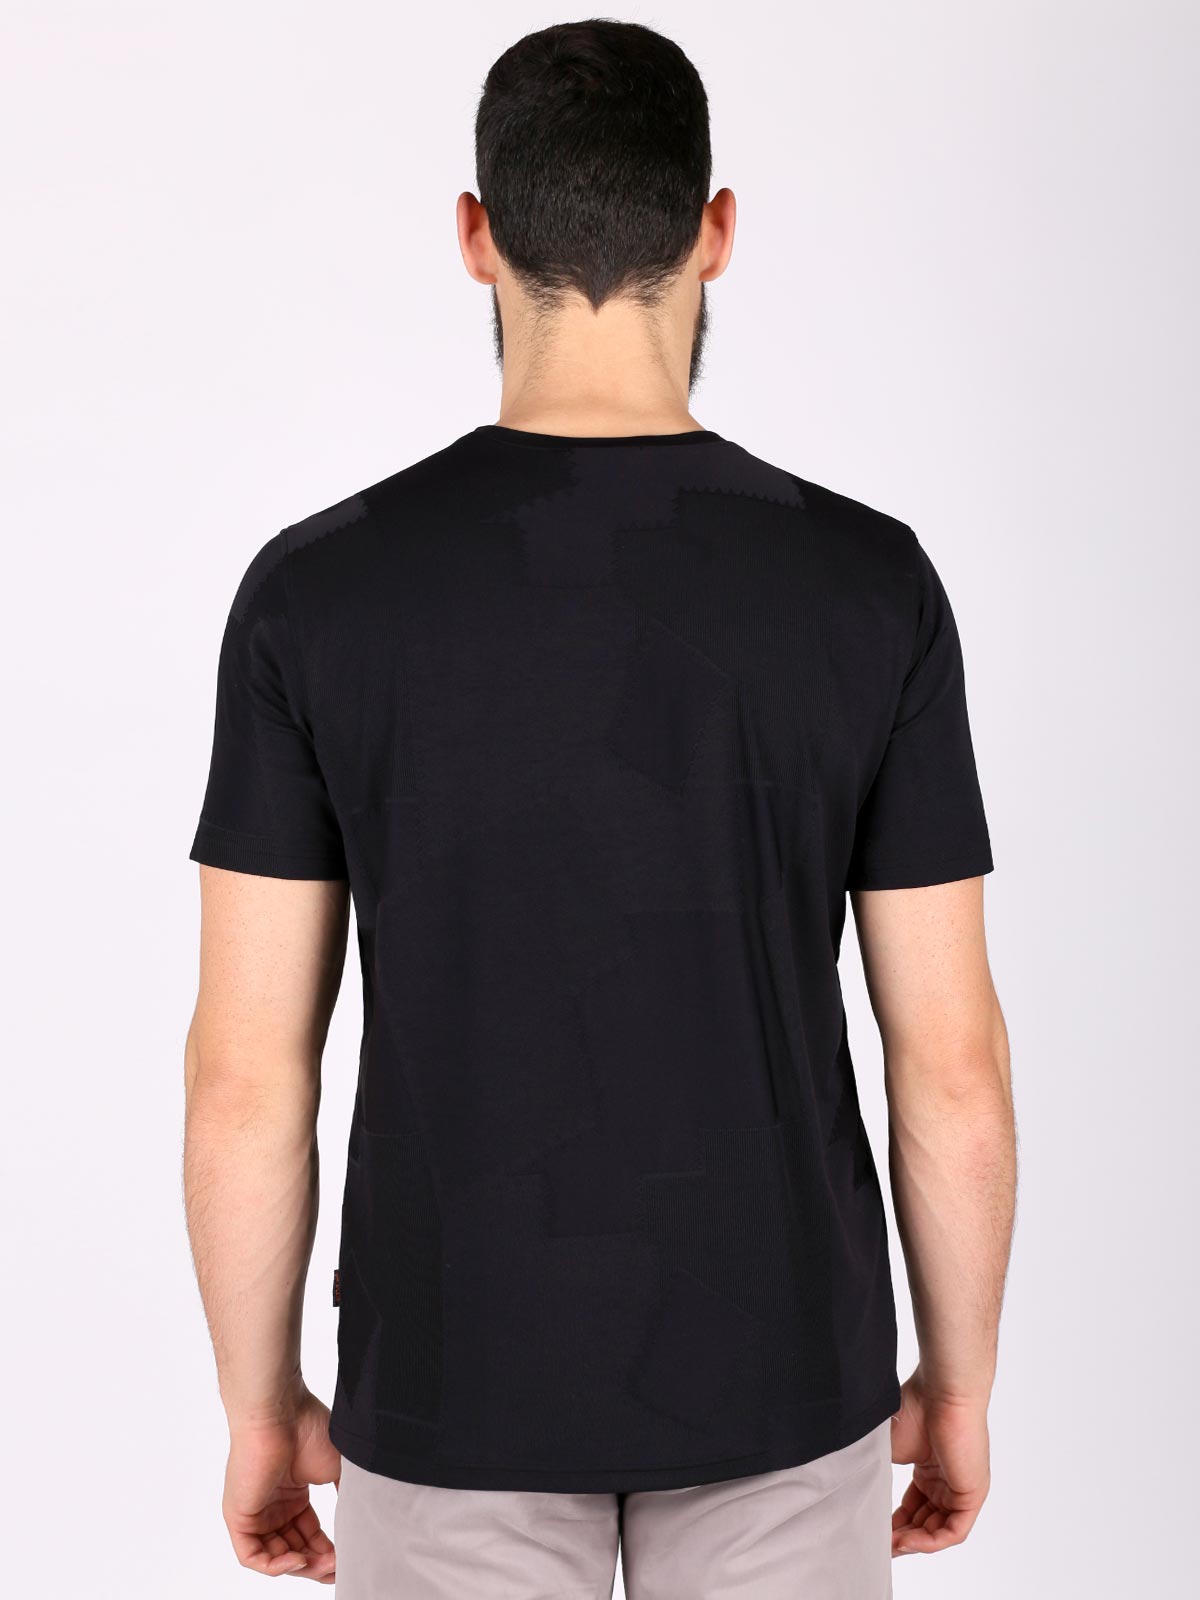  tricou negru cu relief abstract  - 88006 € 6.75 img2